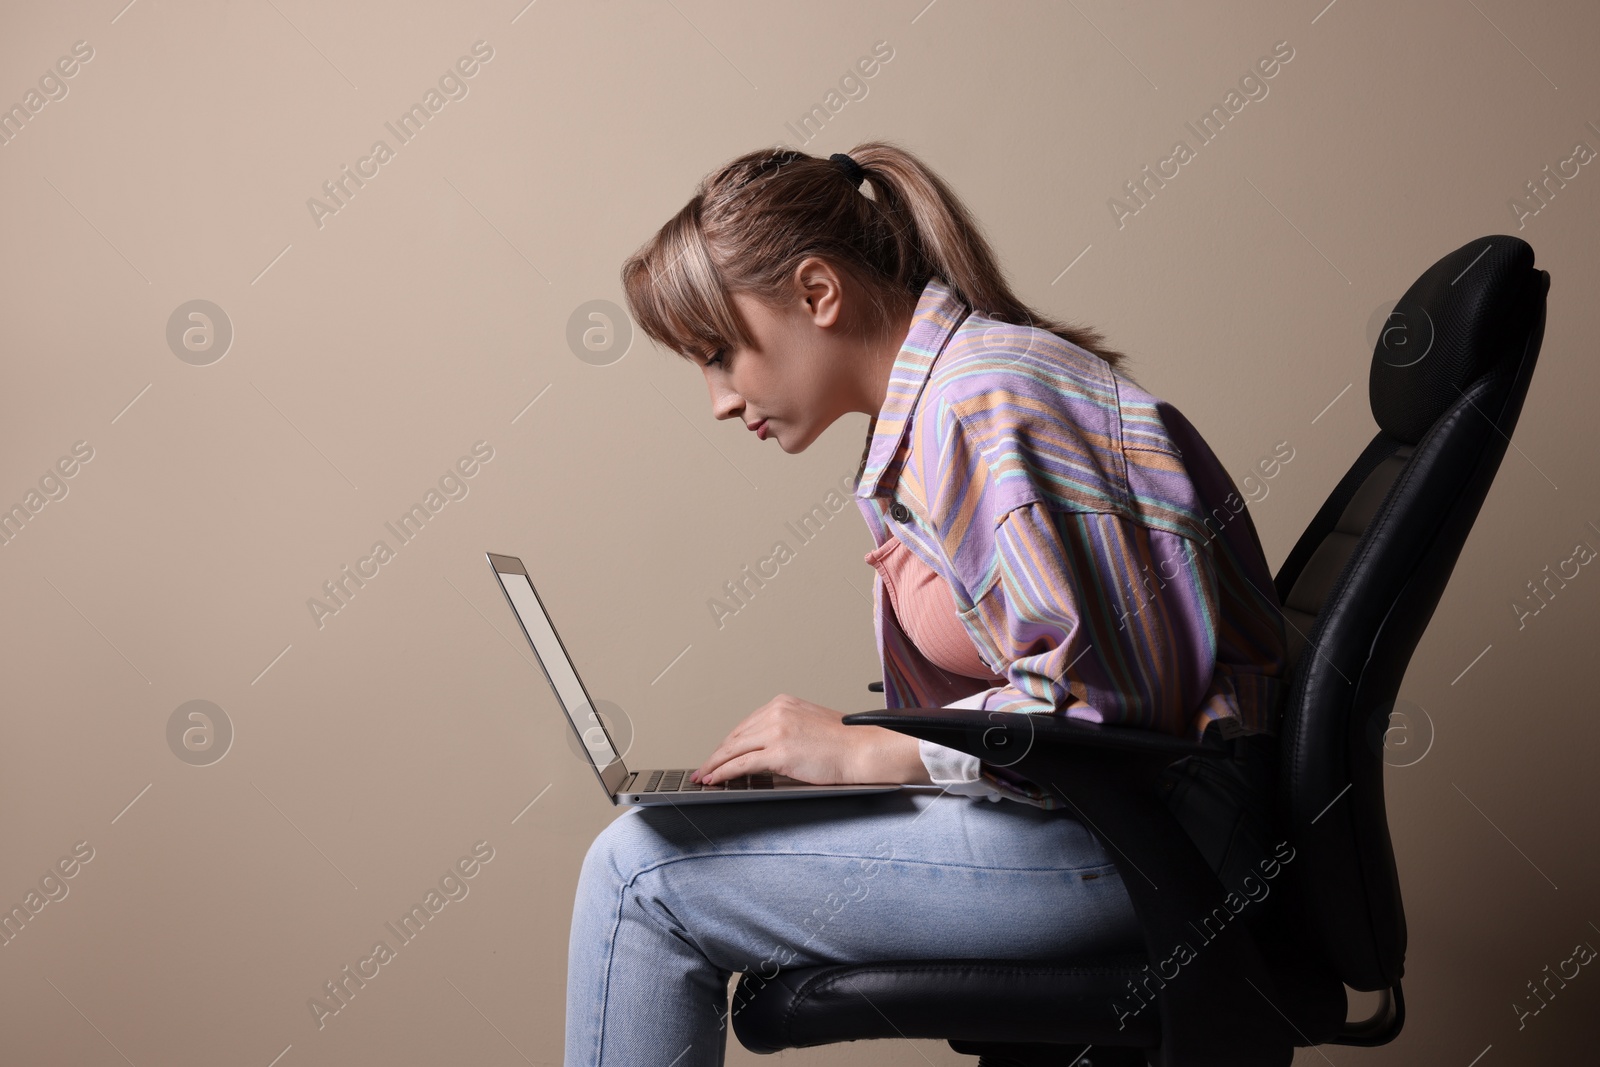 Photo of Young woman with poor posture using laptop while sitting on chair against beige background